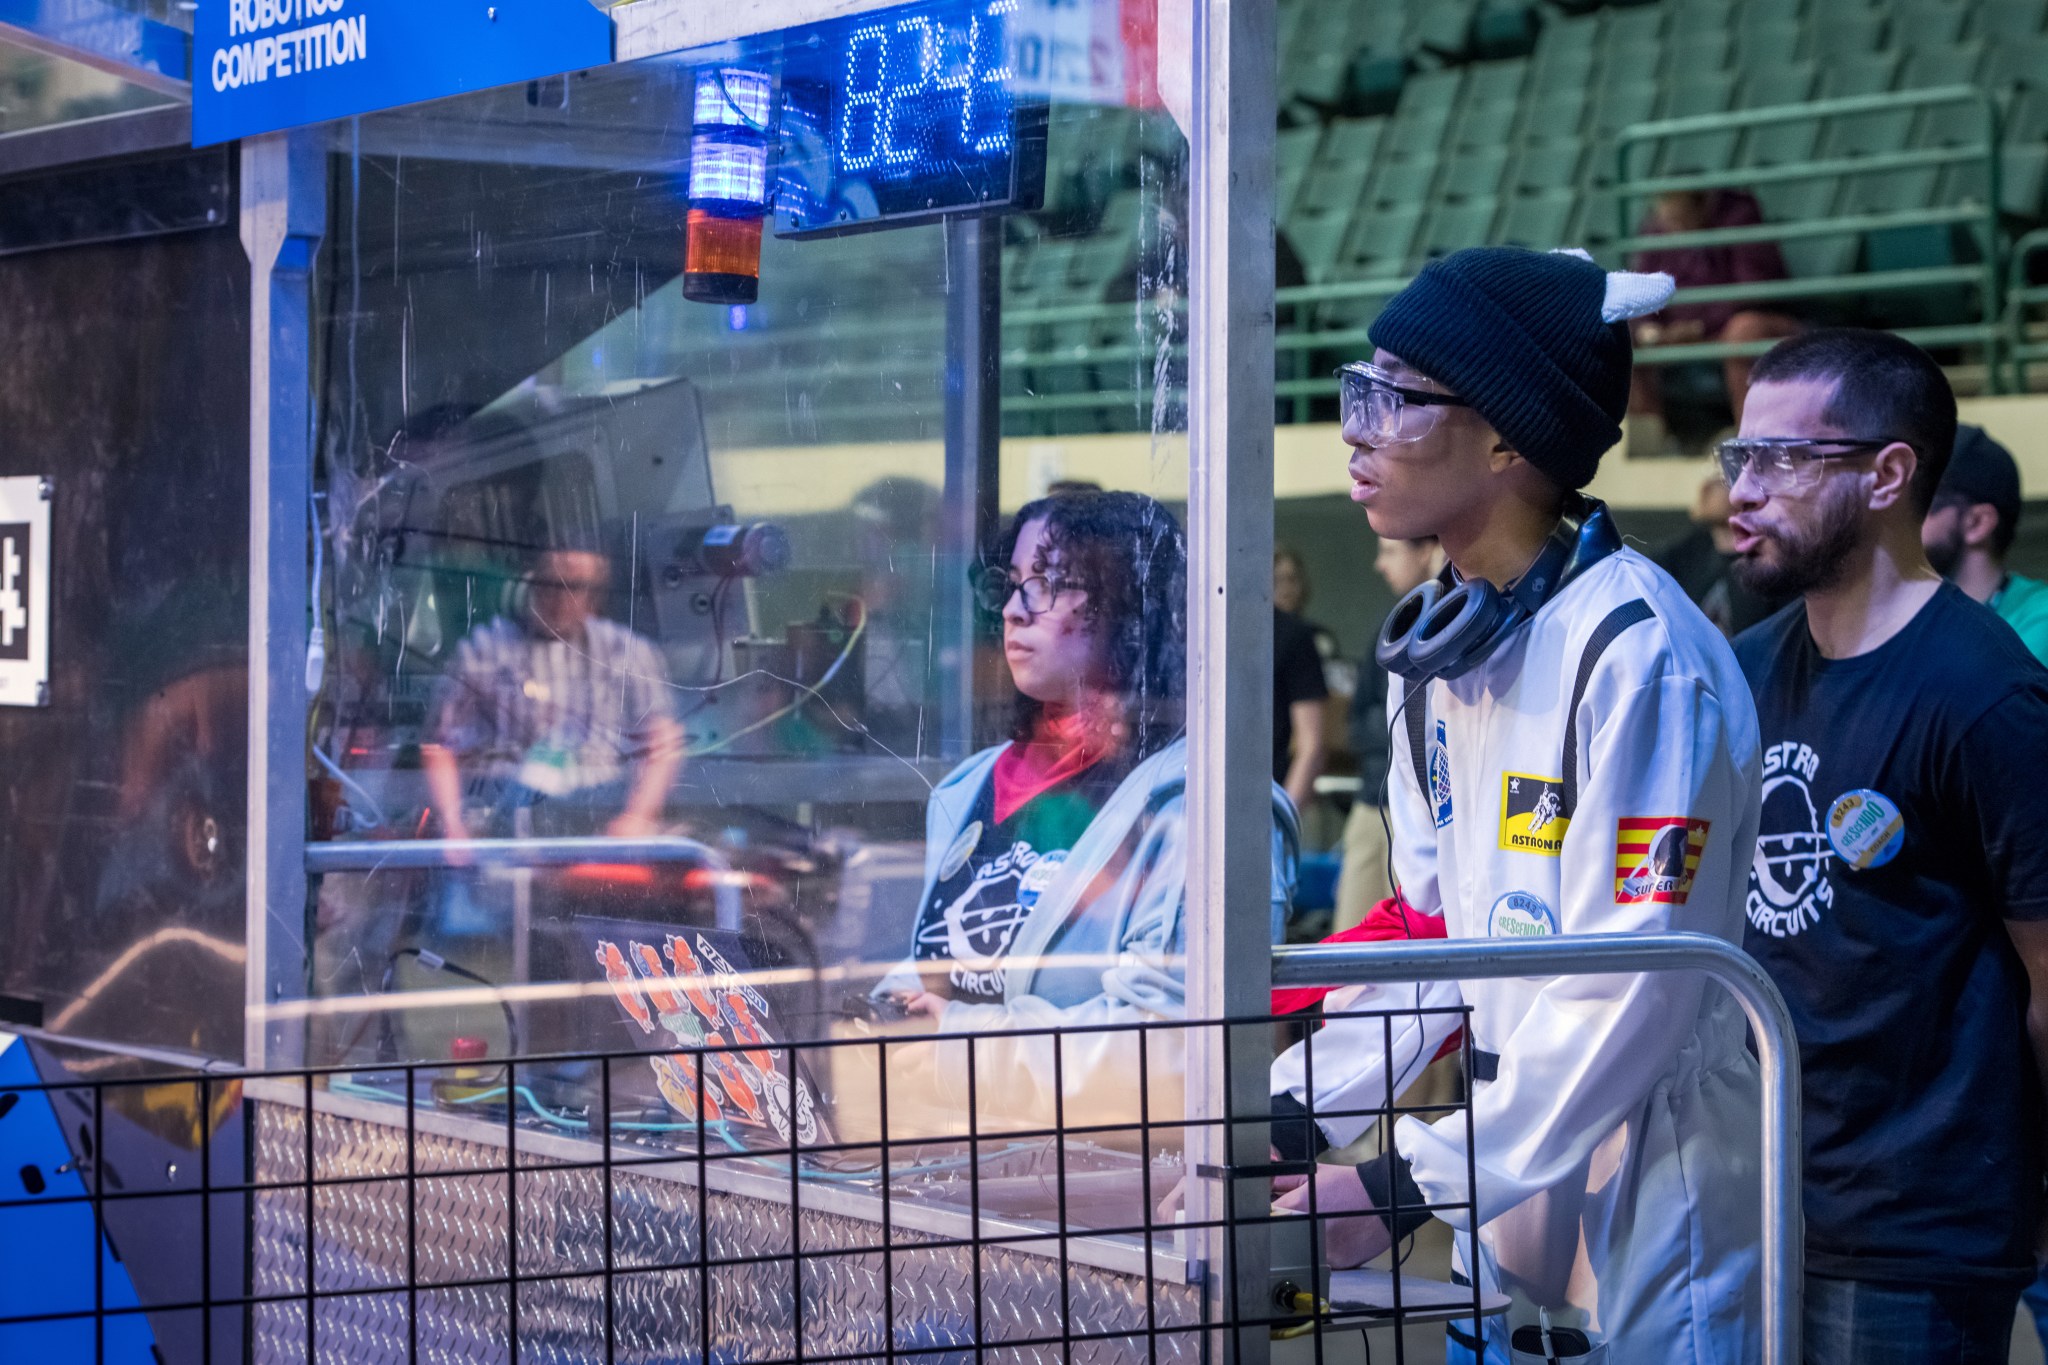 Two team members stand behind a plexiglass screen and work controls for their robot. One person cheers them on from behind.